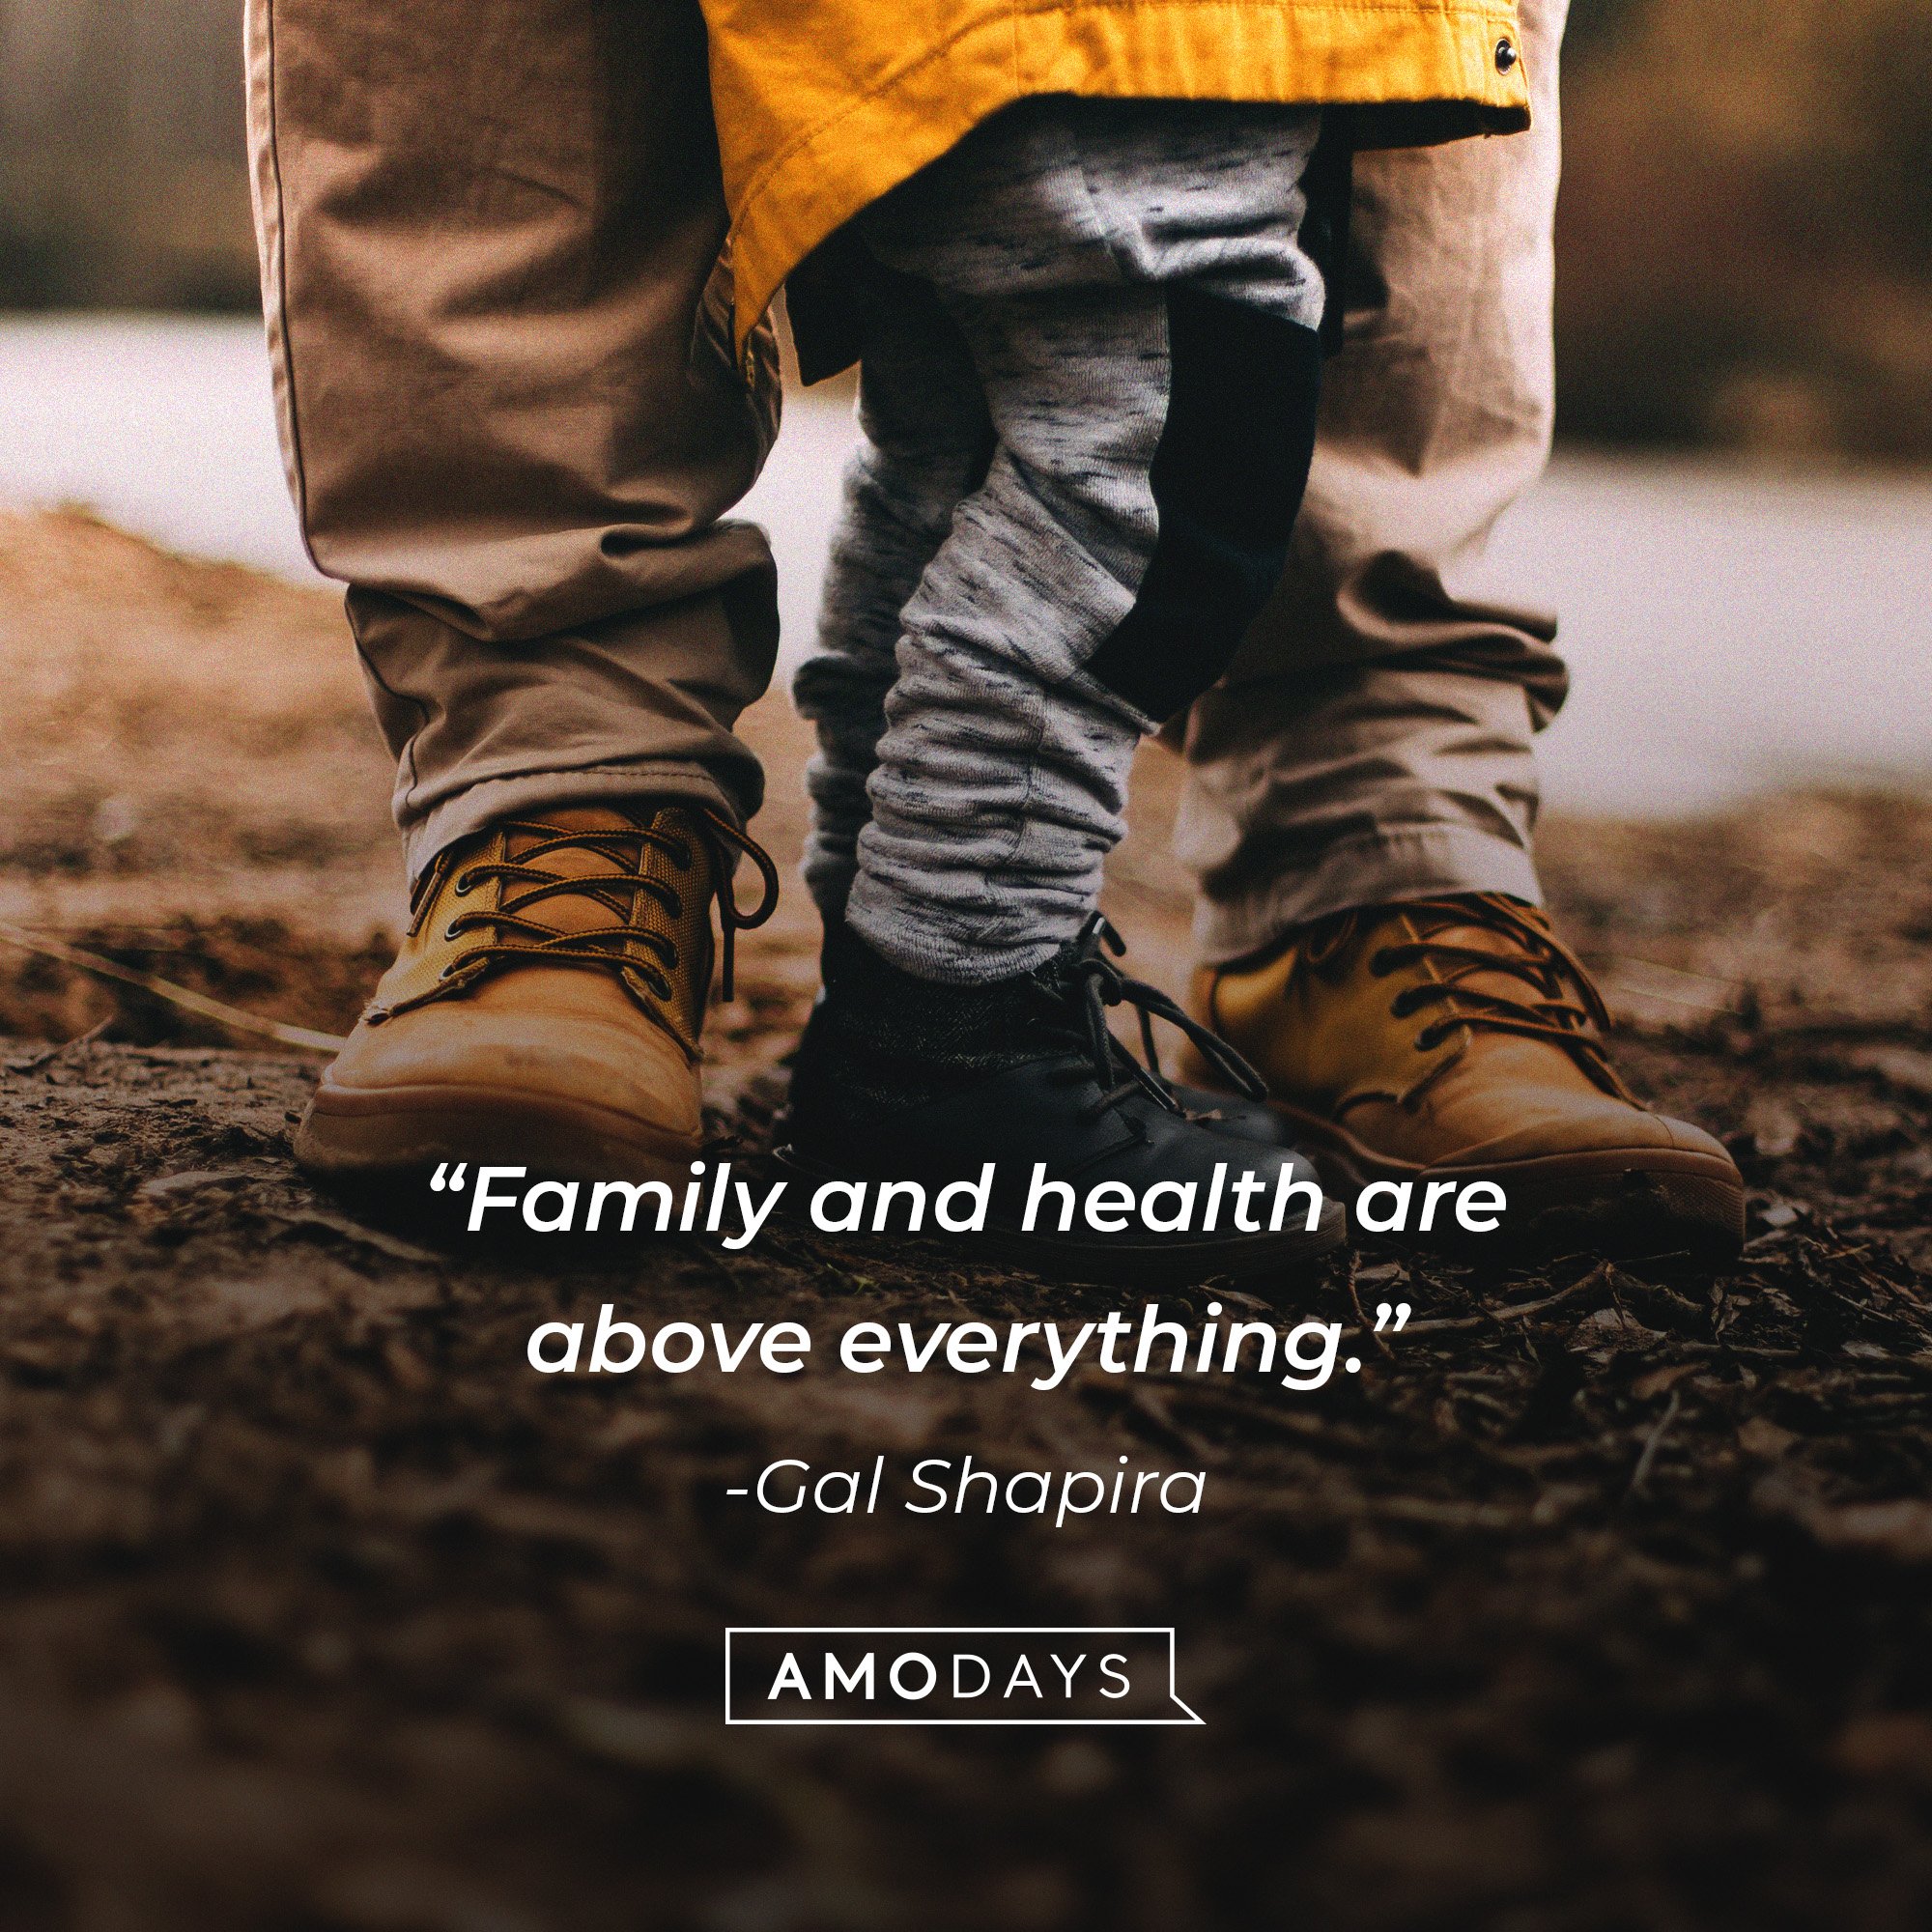 Gal Shapira's quote: “Family and health are above everything.” | Inage: AmoDays